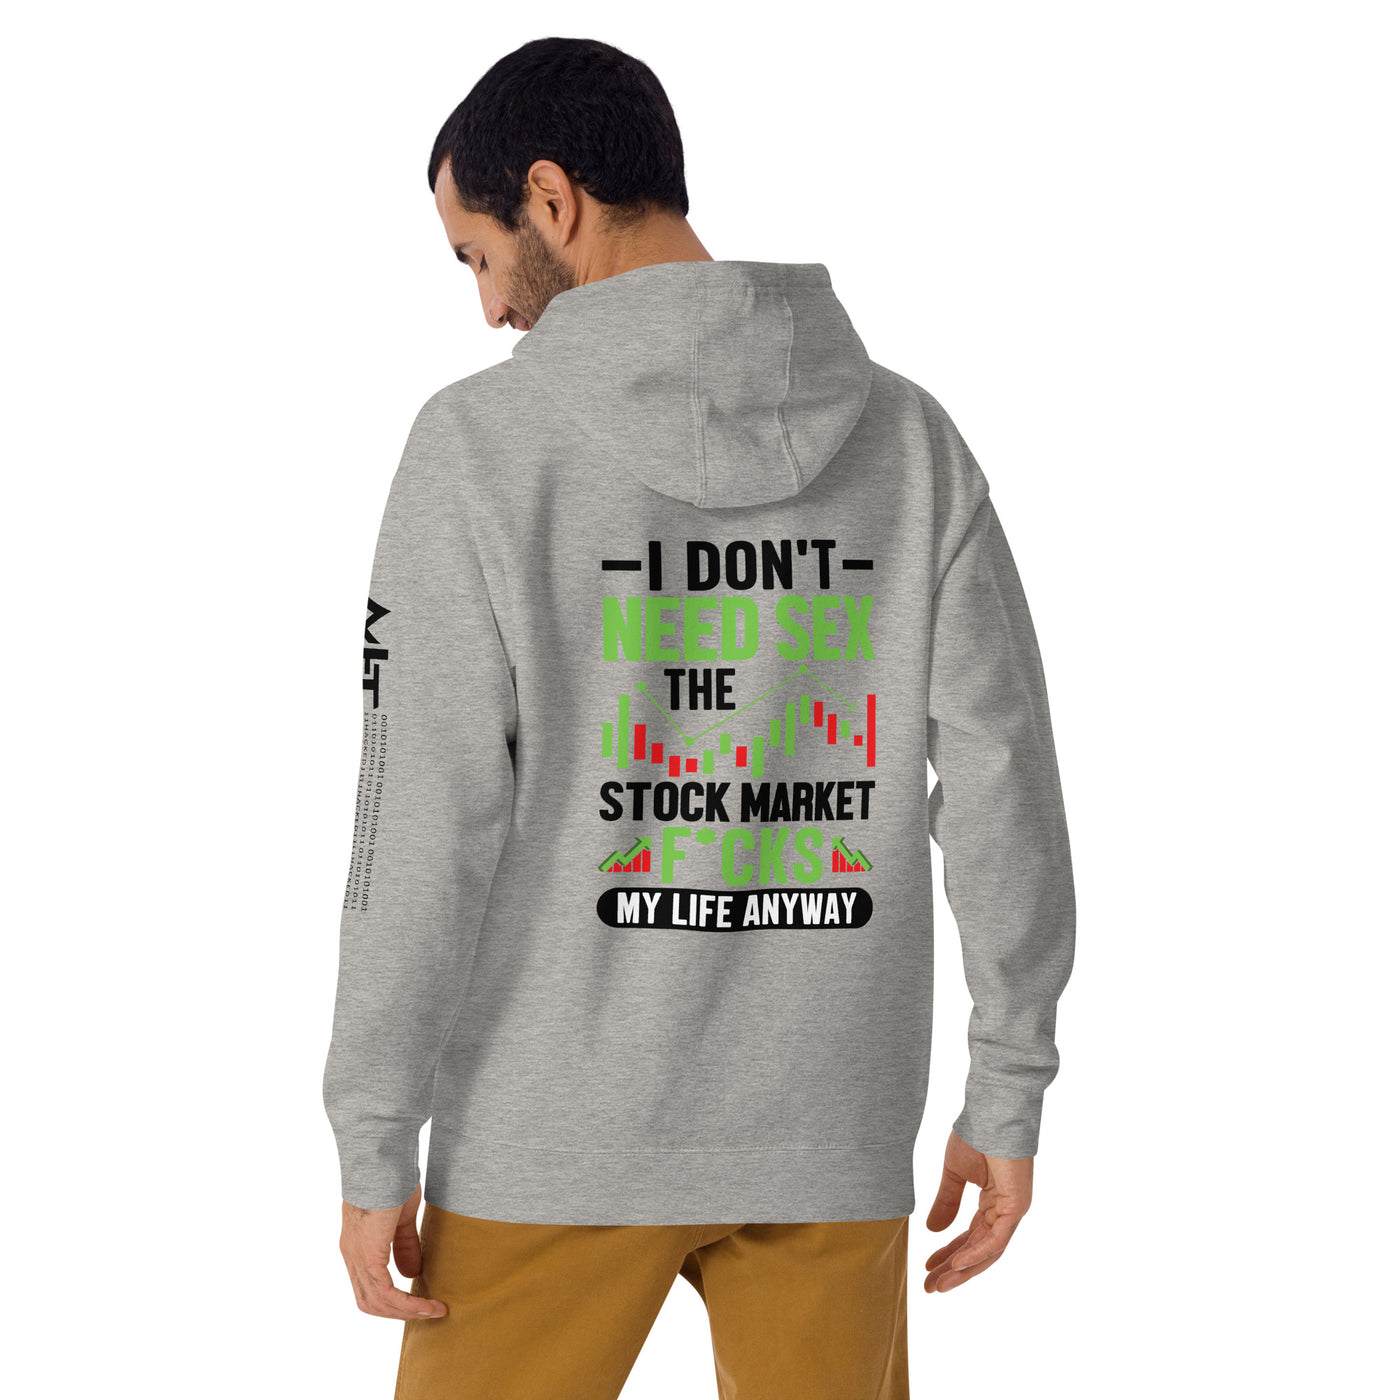 I don't Need sex, the Stock Market Fucks my life anyway in Dark Text - Unisex Hoodie ( Back Print )